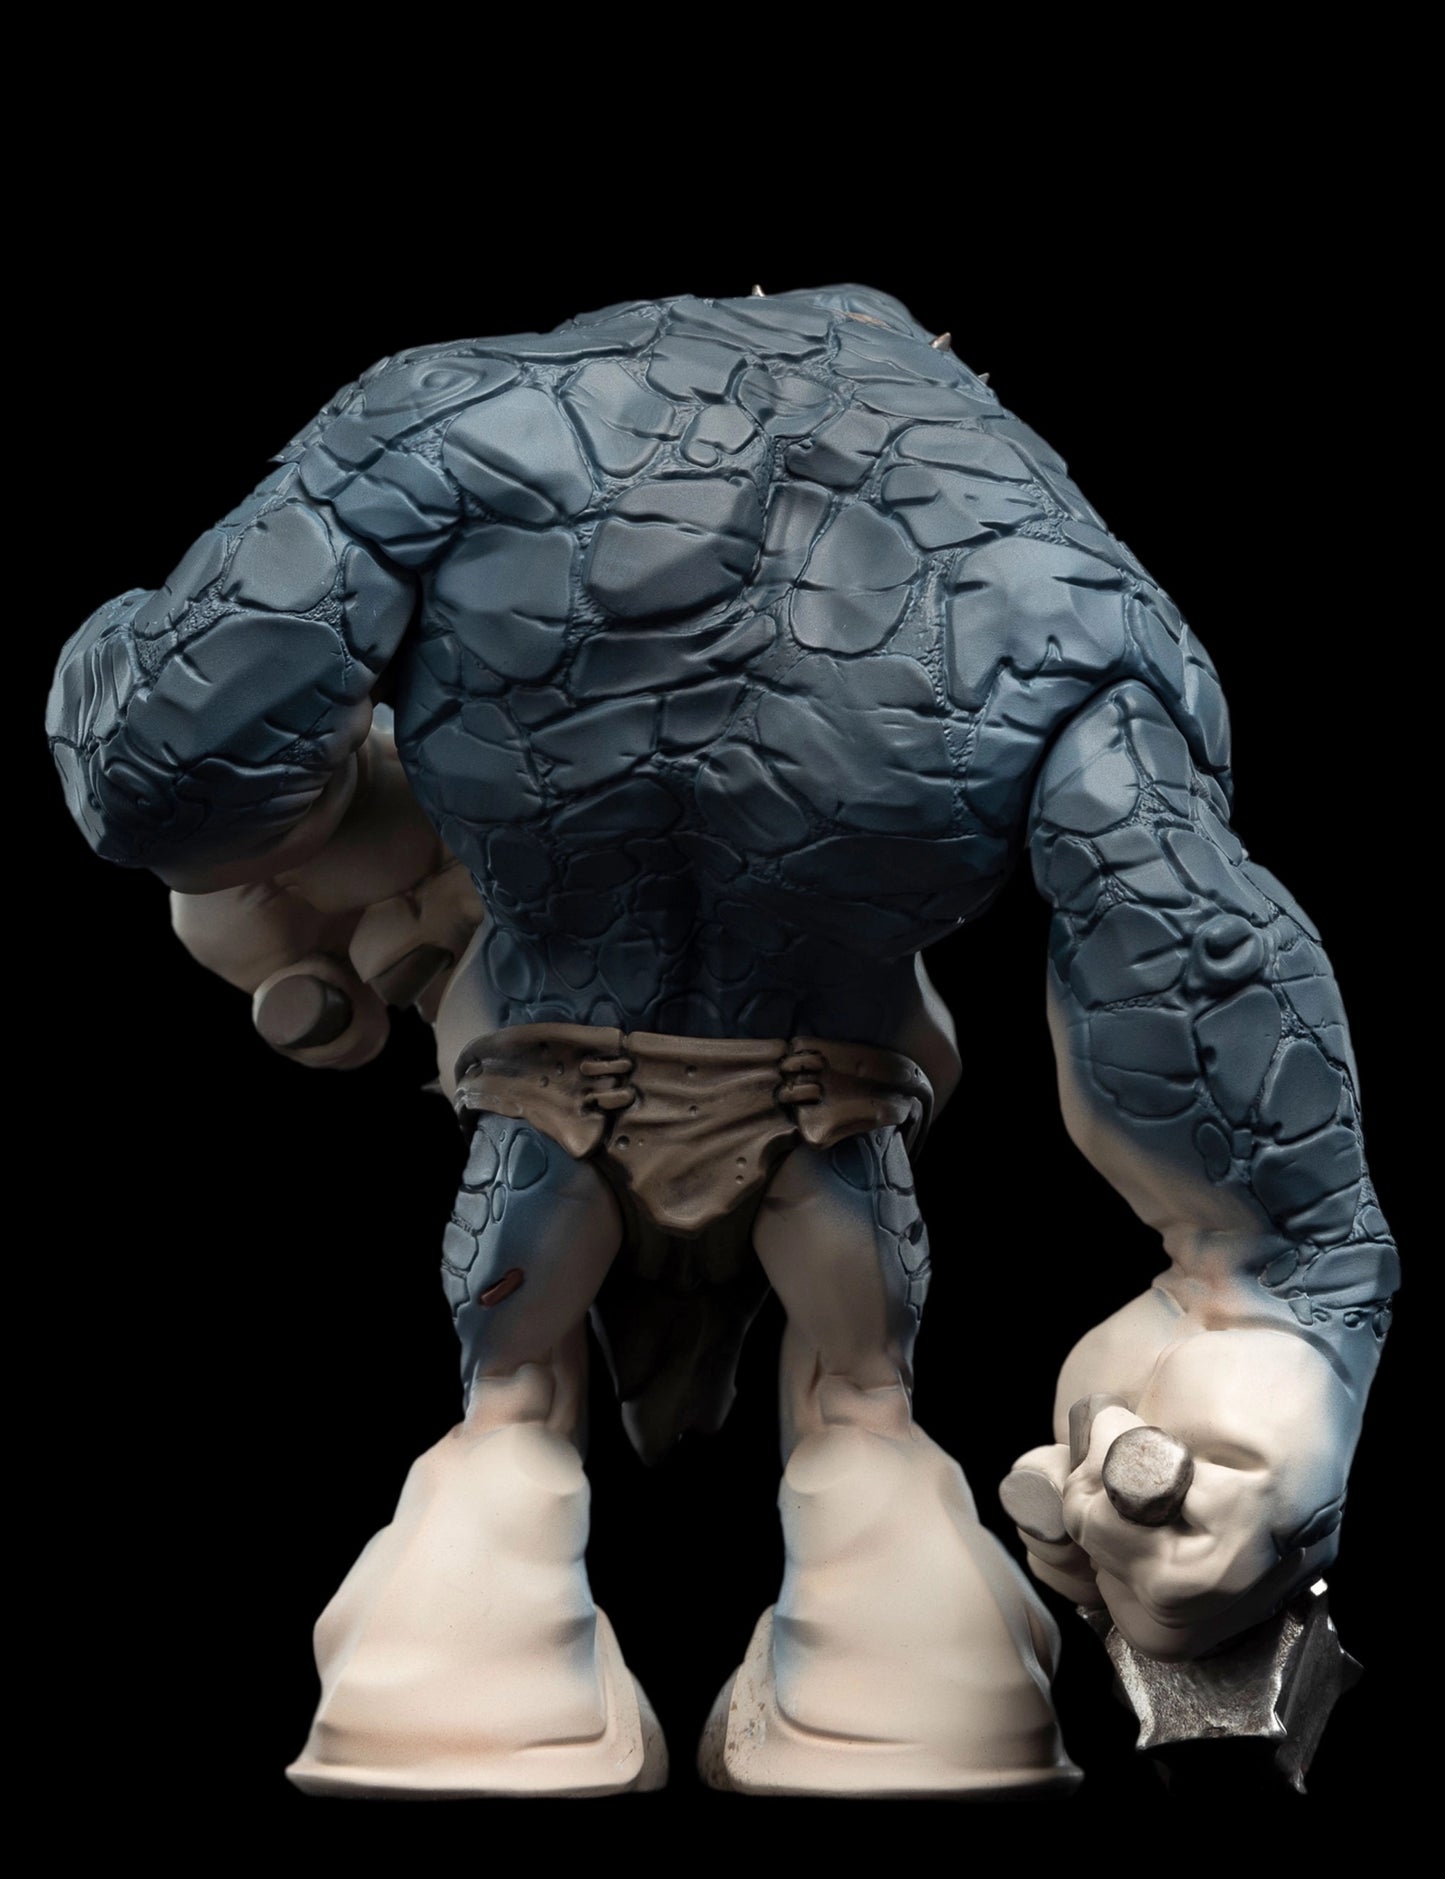 Cave Troll Lord of the Rings Mini Epics Statue by Weta Workshop